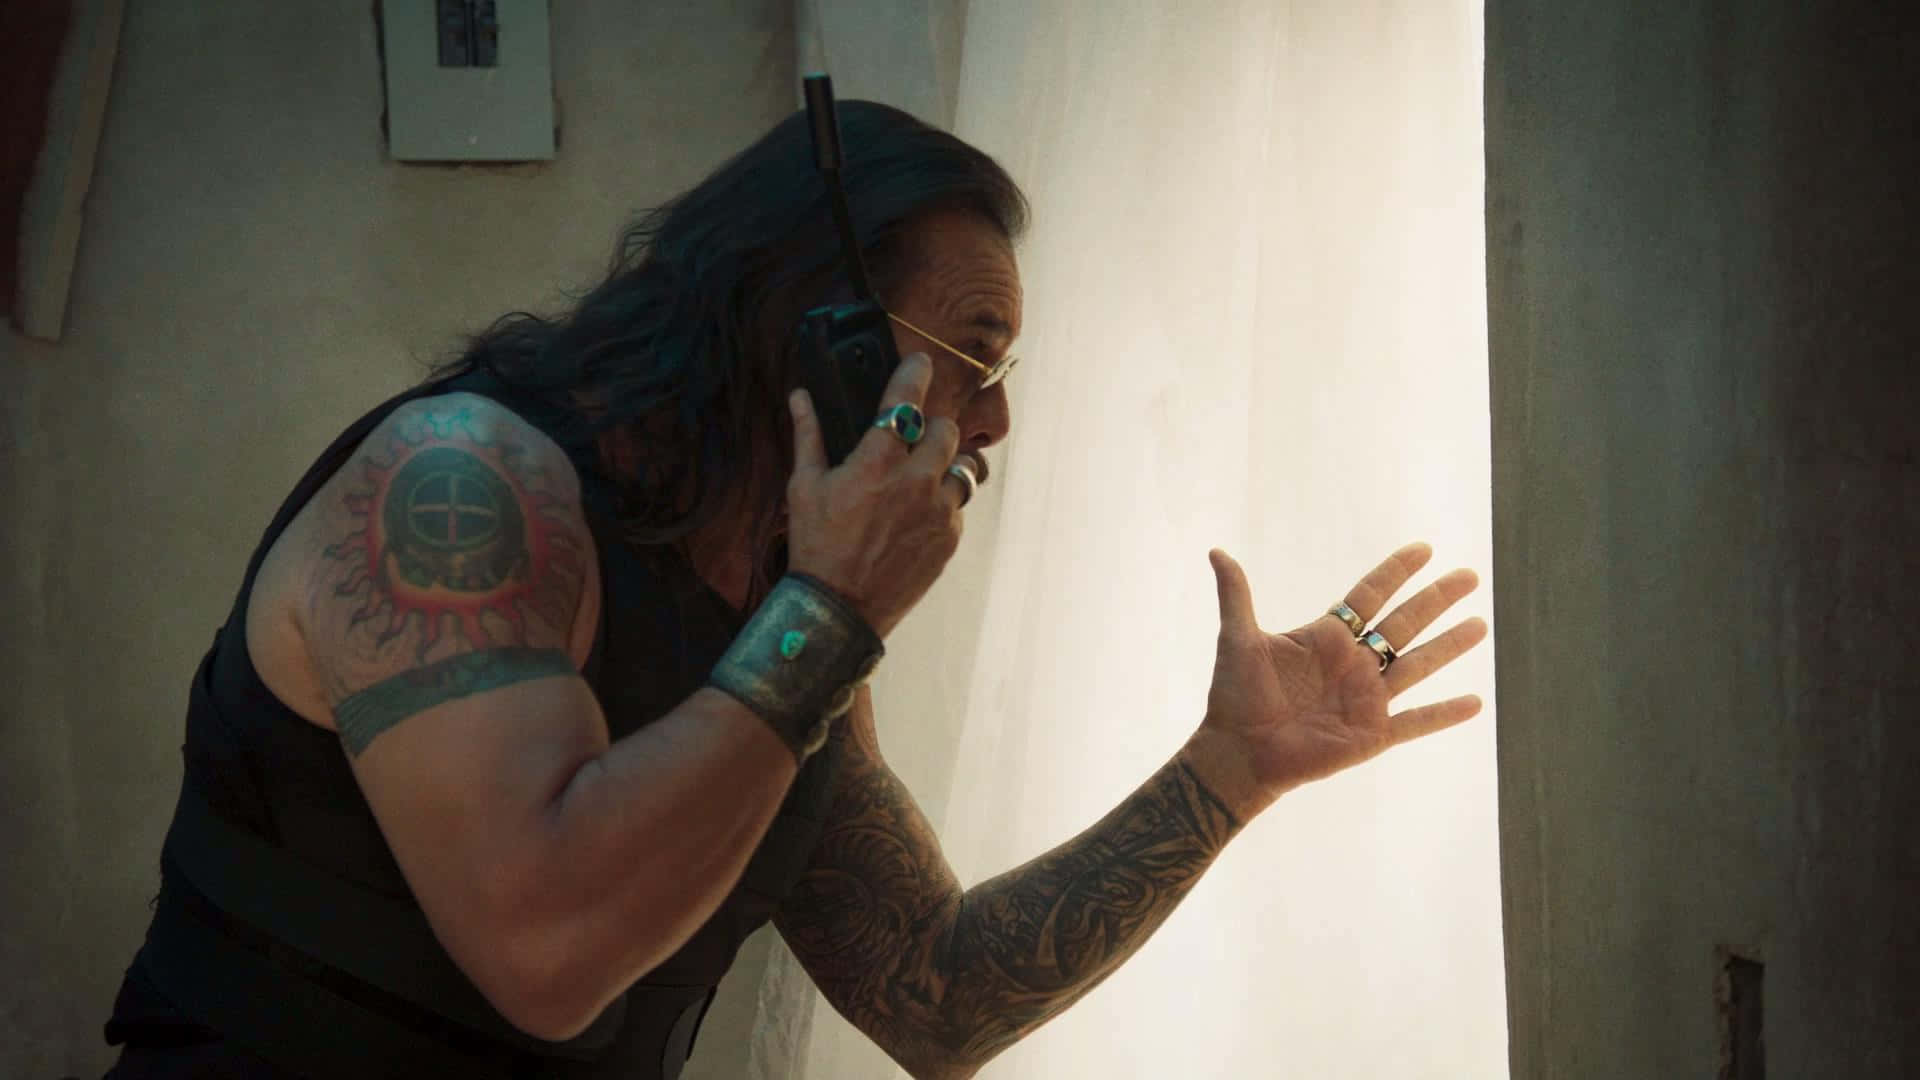 A Man With Tattoos And A Cell Phone In A Room Wallpaper